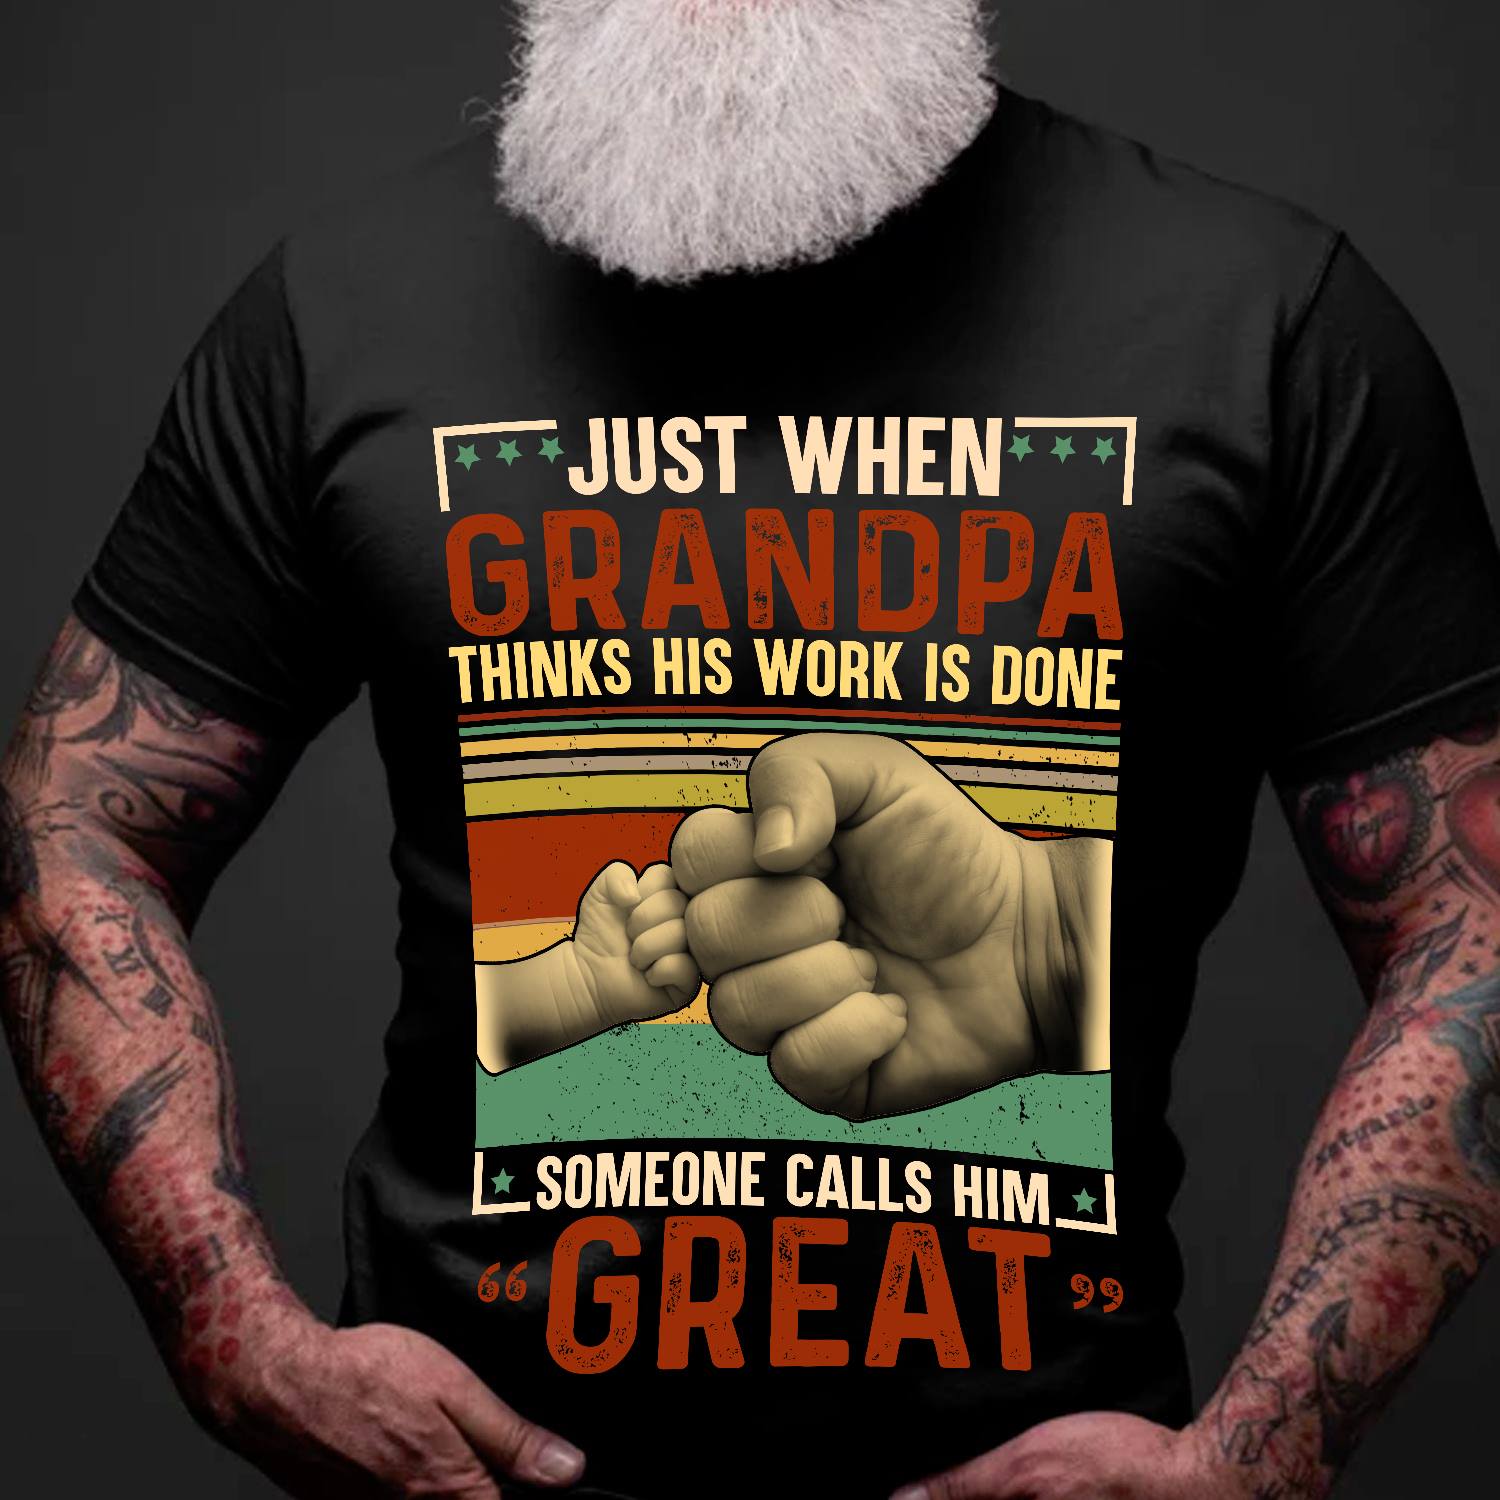 Just when grandpa thinks his work is done someone calls him great - Grandpa and grandkid